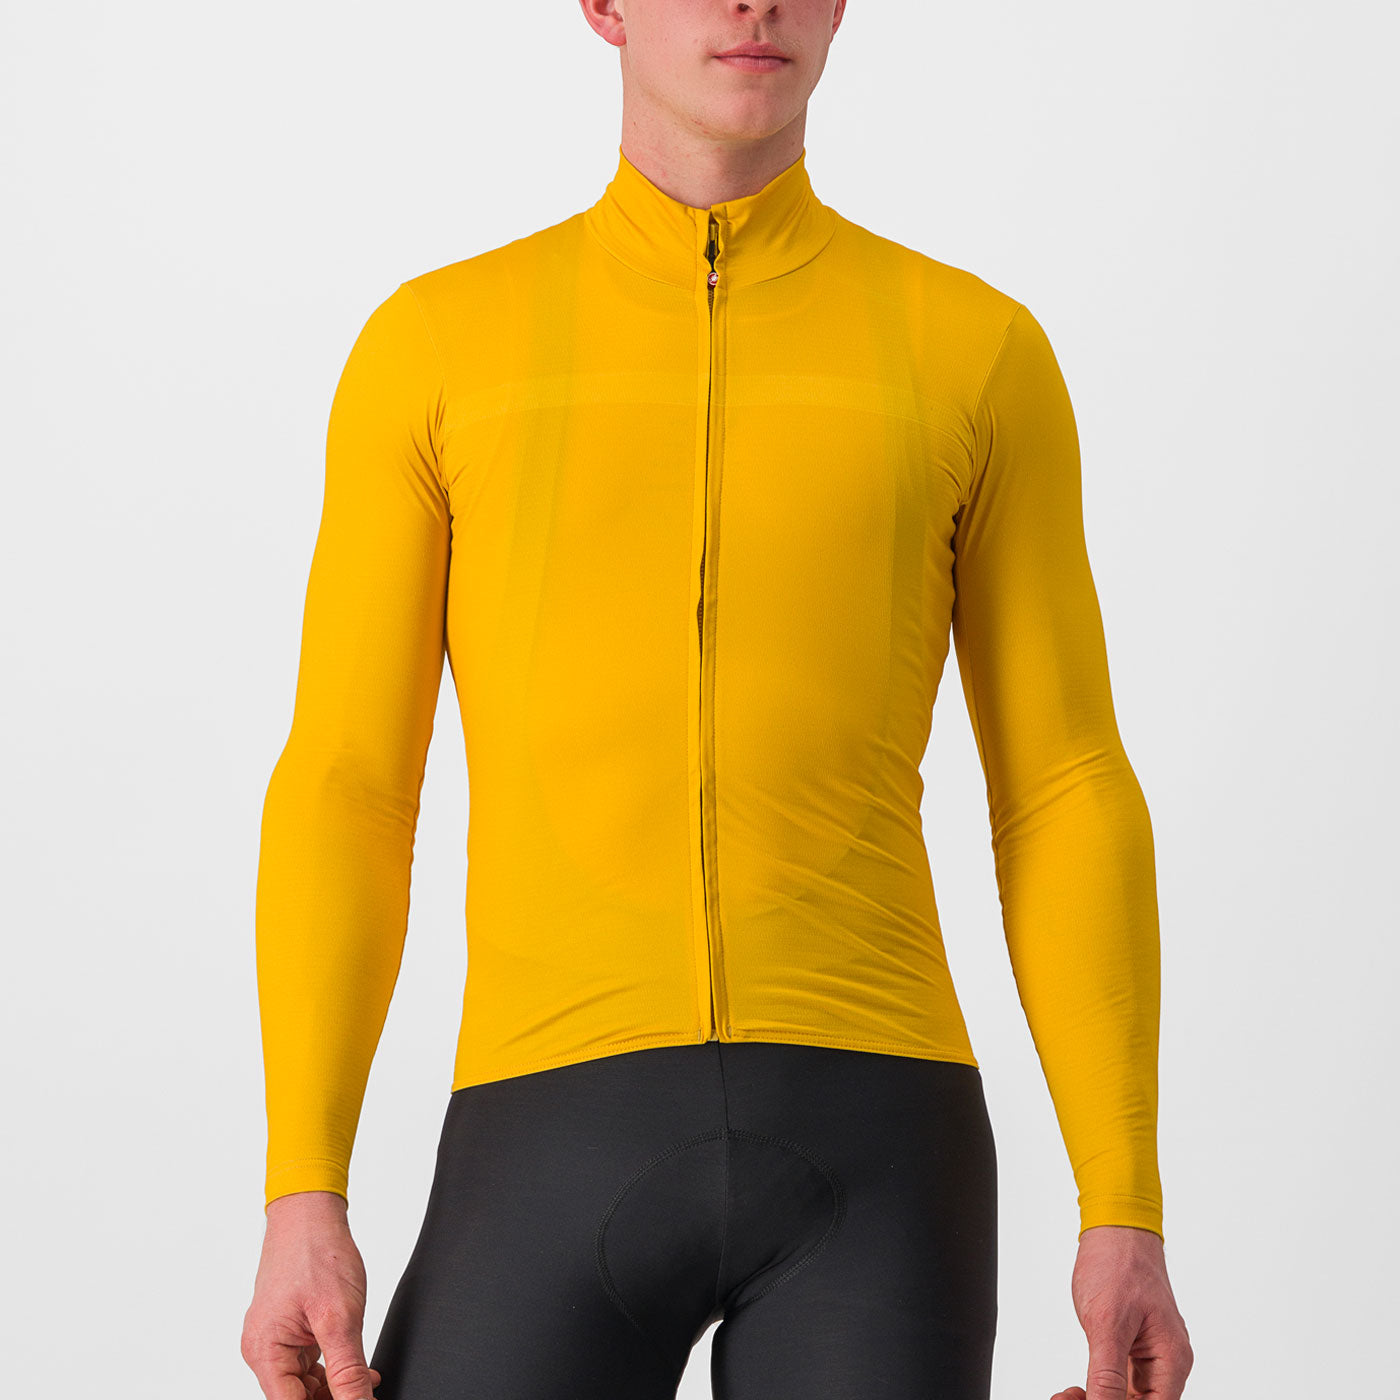 Castelli Pro Mid long sleeves jersey - Yellow | All4cycling